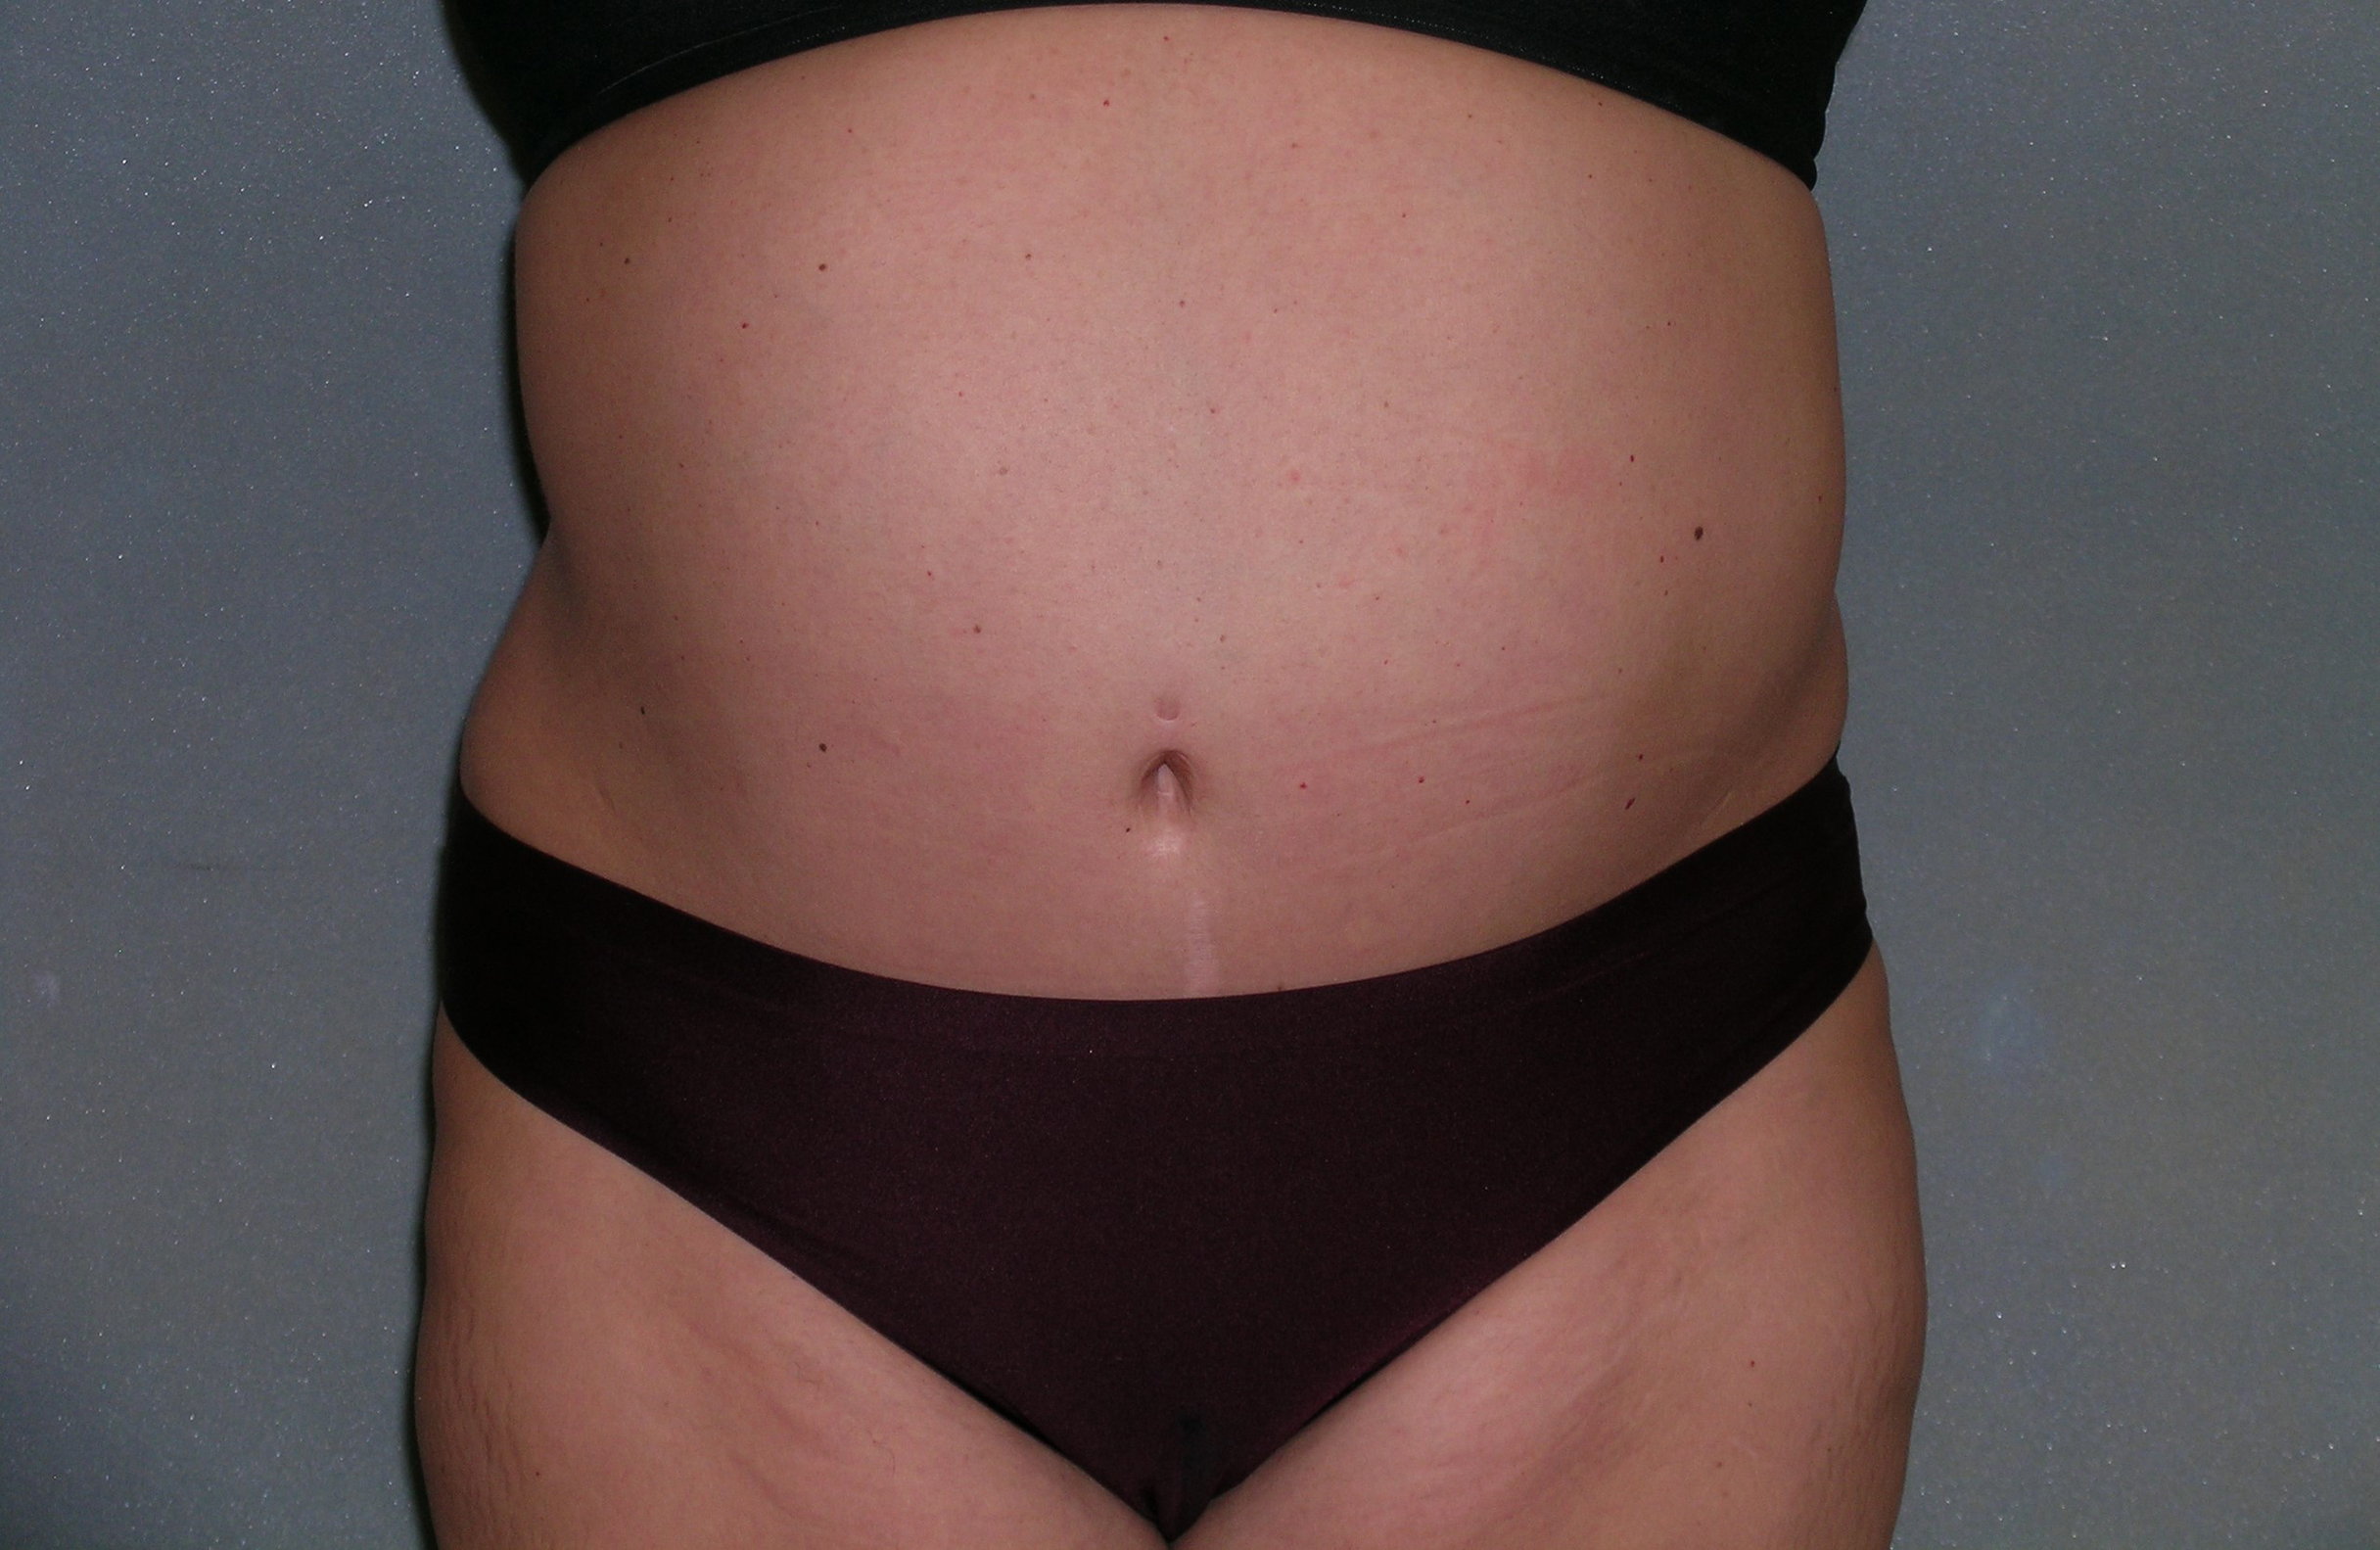 Body Liposculpture Before and After Photos